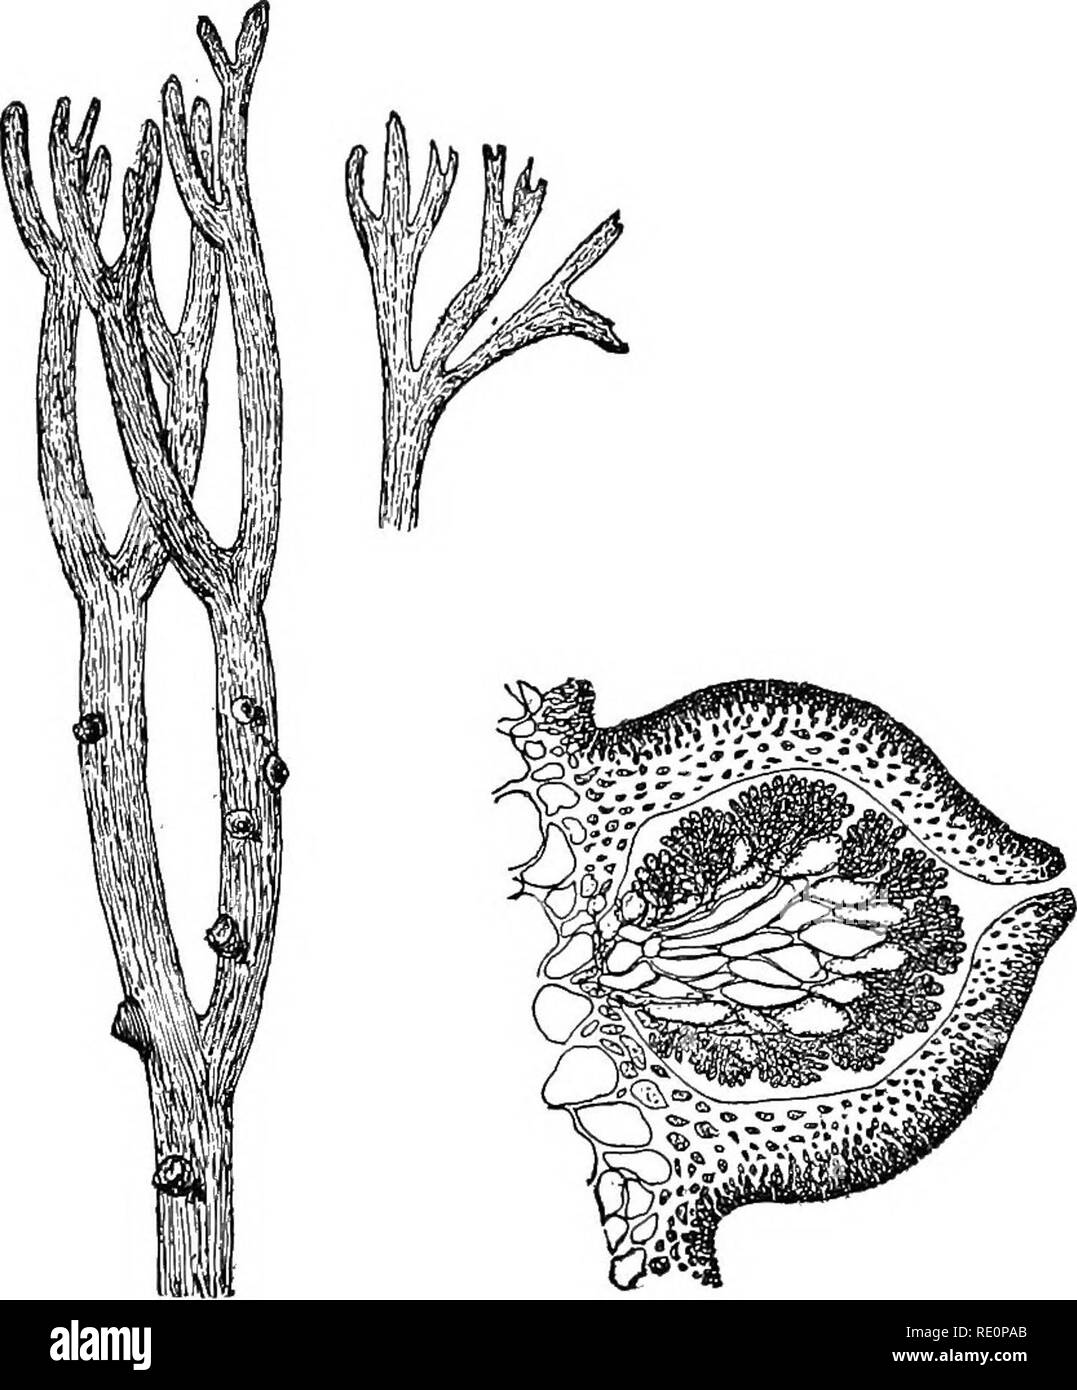 . Elementary botany. Botany. ii8 MORPHOLOG Y.. Fig. 126. Fig. 127. Gracillaria, portion of frond, Gracillaria, section of cystocarp showing position of cysto- showing spores, carps. 273. The principal groups of the algse are the following: ChlorophycecB. Green algse. Protococcoidese (the protococcus (Pleurococ- cus vulgaris); the red-snow plant (Sphserella nivalis), etc. Conjugateae (spirogyra, zygnema, Inougeotia, desniids, etc.). Siphonese (vaucheria). Confervoidese (oedogonium, chcetophora, cole- ochaete). CyanophycecB (nostoc, oscillatoria, etc.). The blue-green algse. PkcBophycecB (fucus, Stock Photo